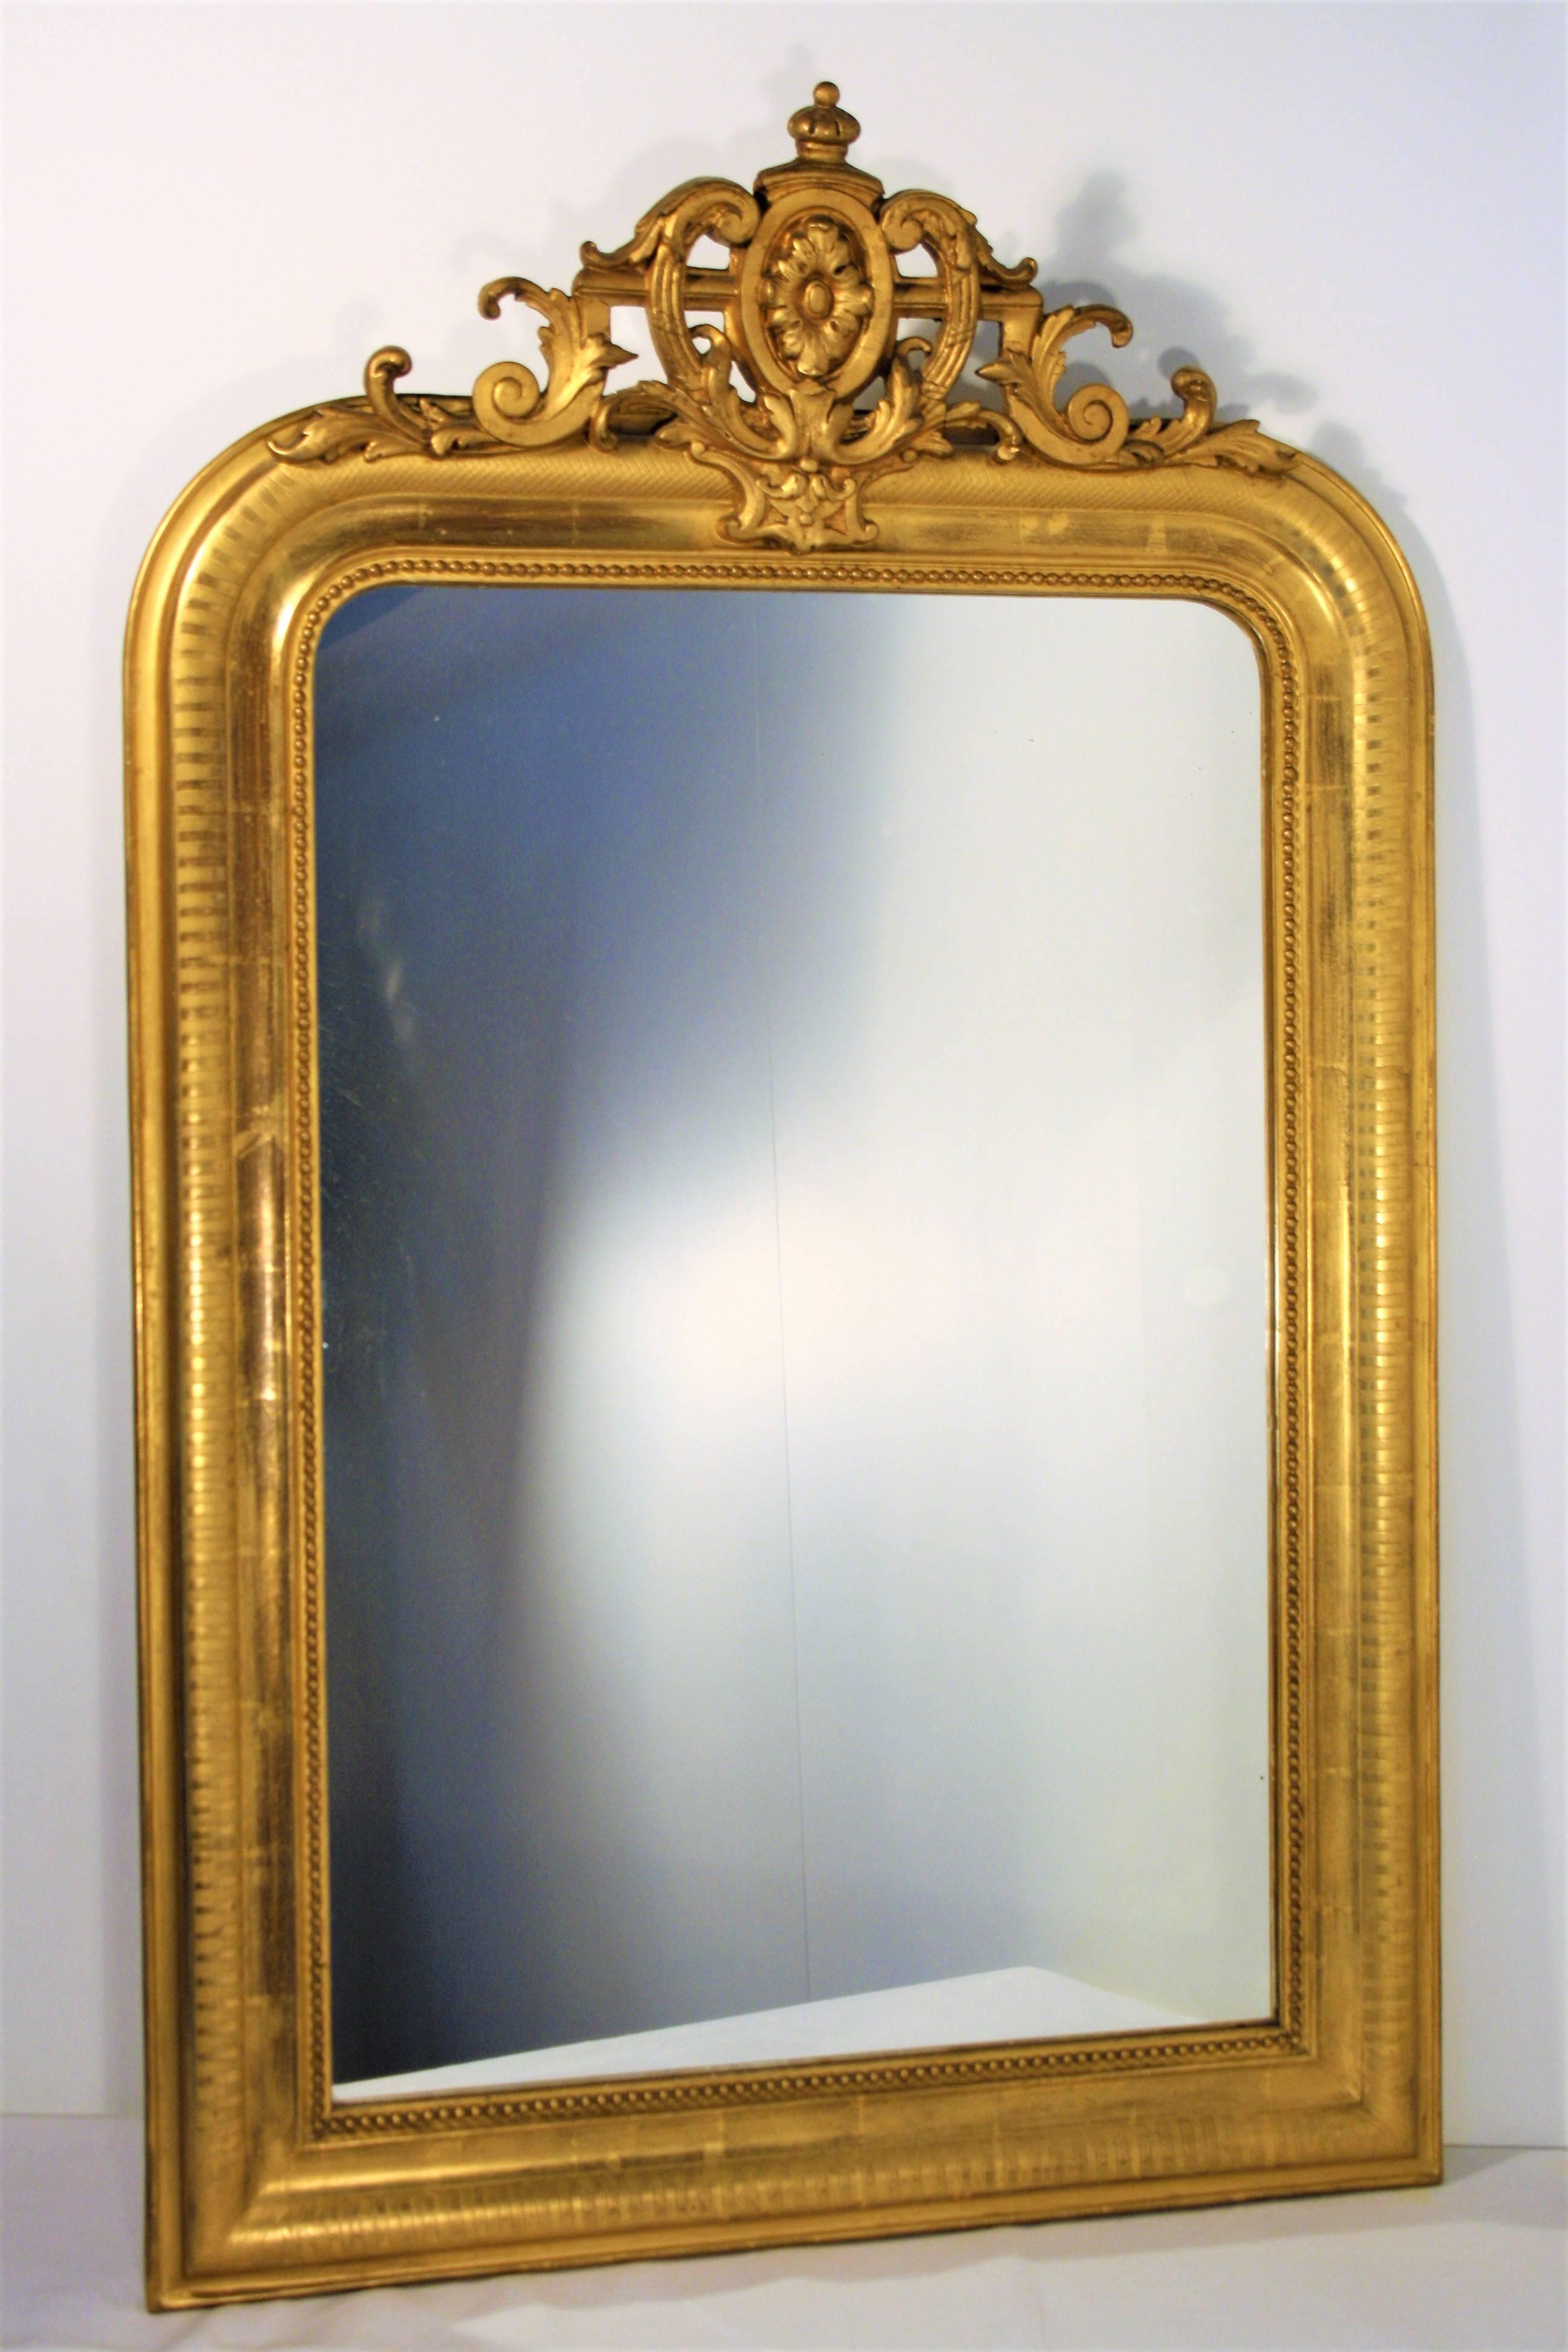 A beautiful French Louis Philippe gold gilt mirror with cartouche from mid-19th century, with its original mercury glass and its original wooden back.